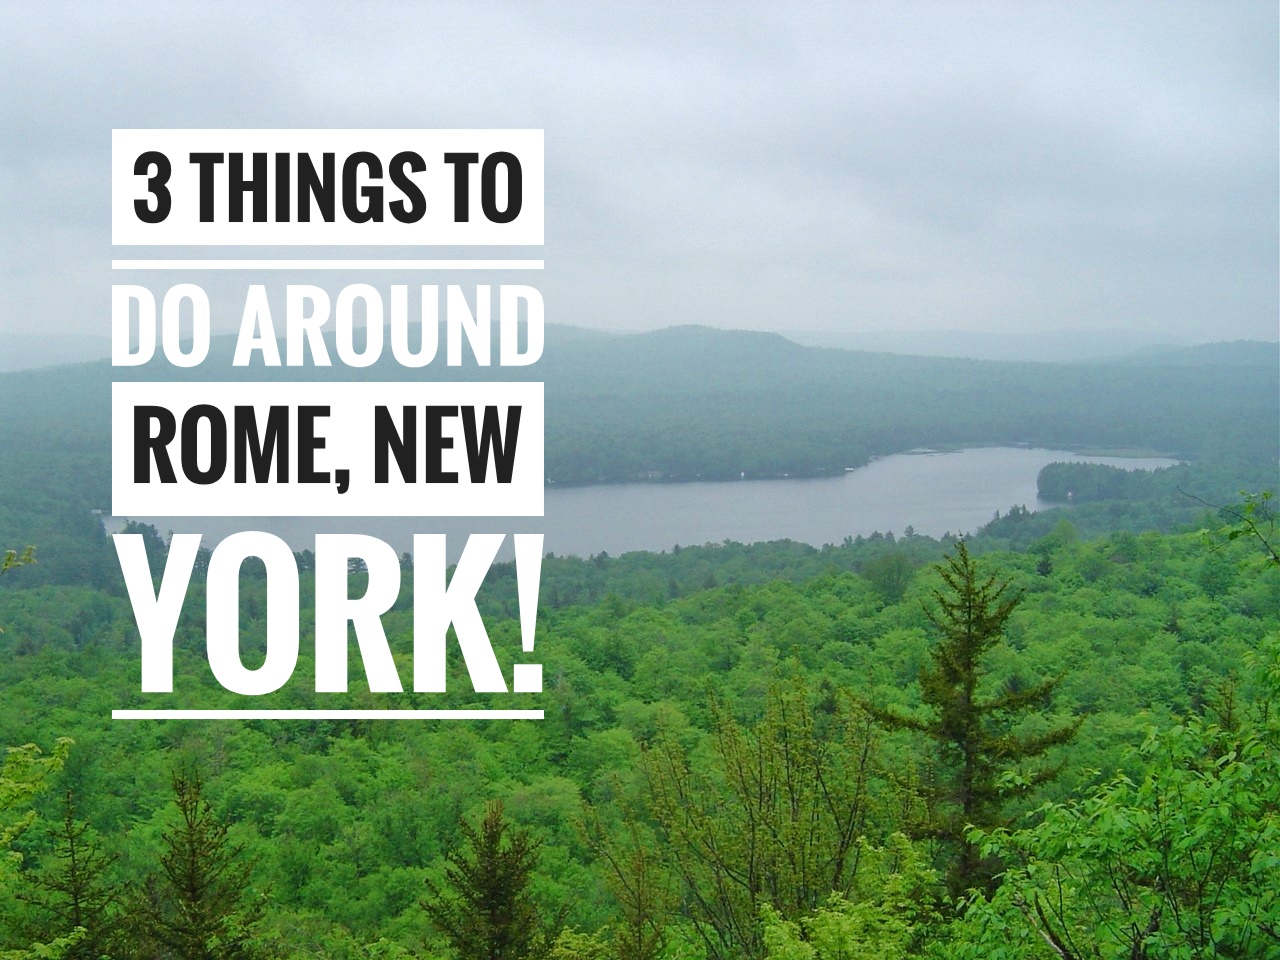 From visiting Fort Stanwix, a National Monument, to hiking in the Adirondack Mountains, Rome is a great starting point of any adventure to explore the surrounding area of upstate New York! Check out these 3 Treasures Of Traveling to do around Rome, New York!